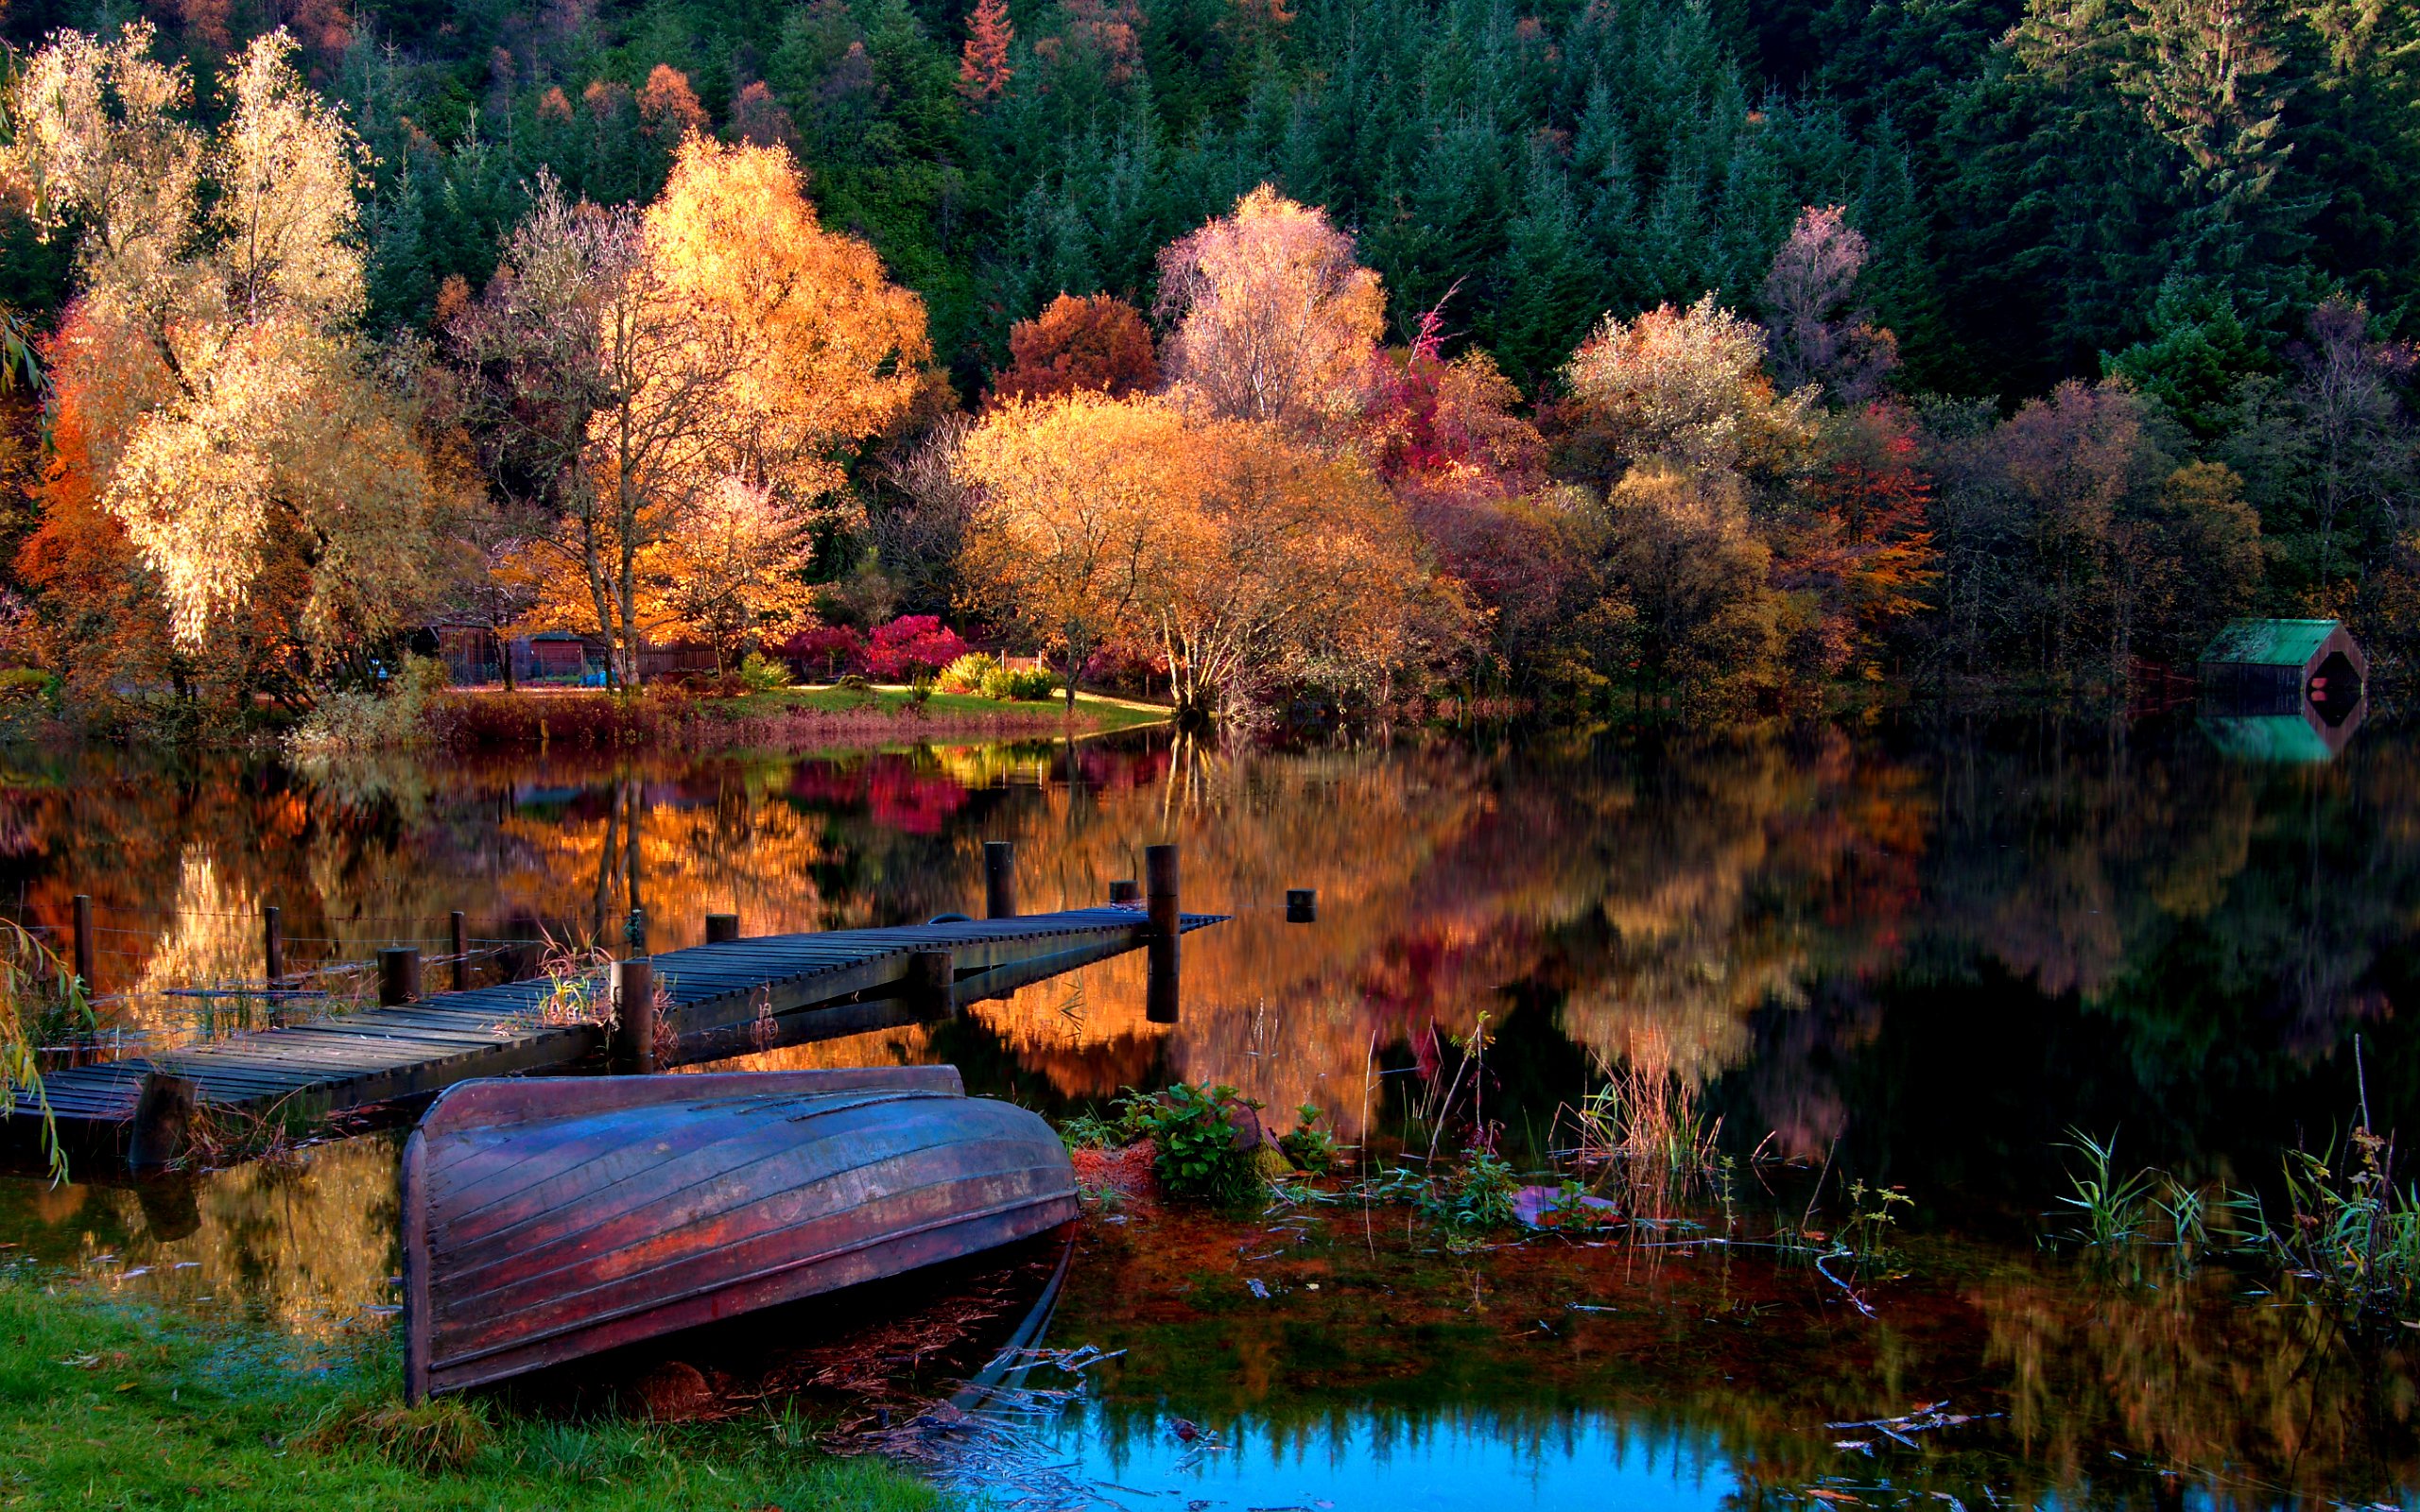 picture, Abandoned, Lake, Color, Nice, Leaves, Shore, Autumn, Splendor, Dock, Water, House, Mirrored, Boat, River, Pretty, Landscape, Mountain, Autumn, Colors, Nature, Weather, Tree, Pier, Green, Houses, Forgot Wallpaper